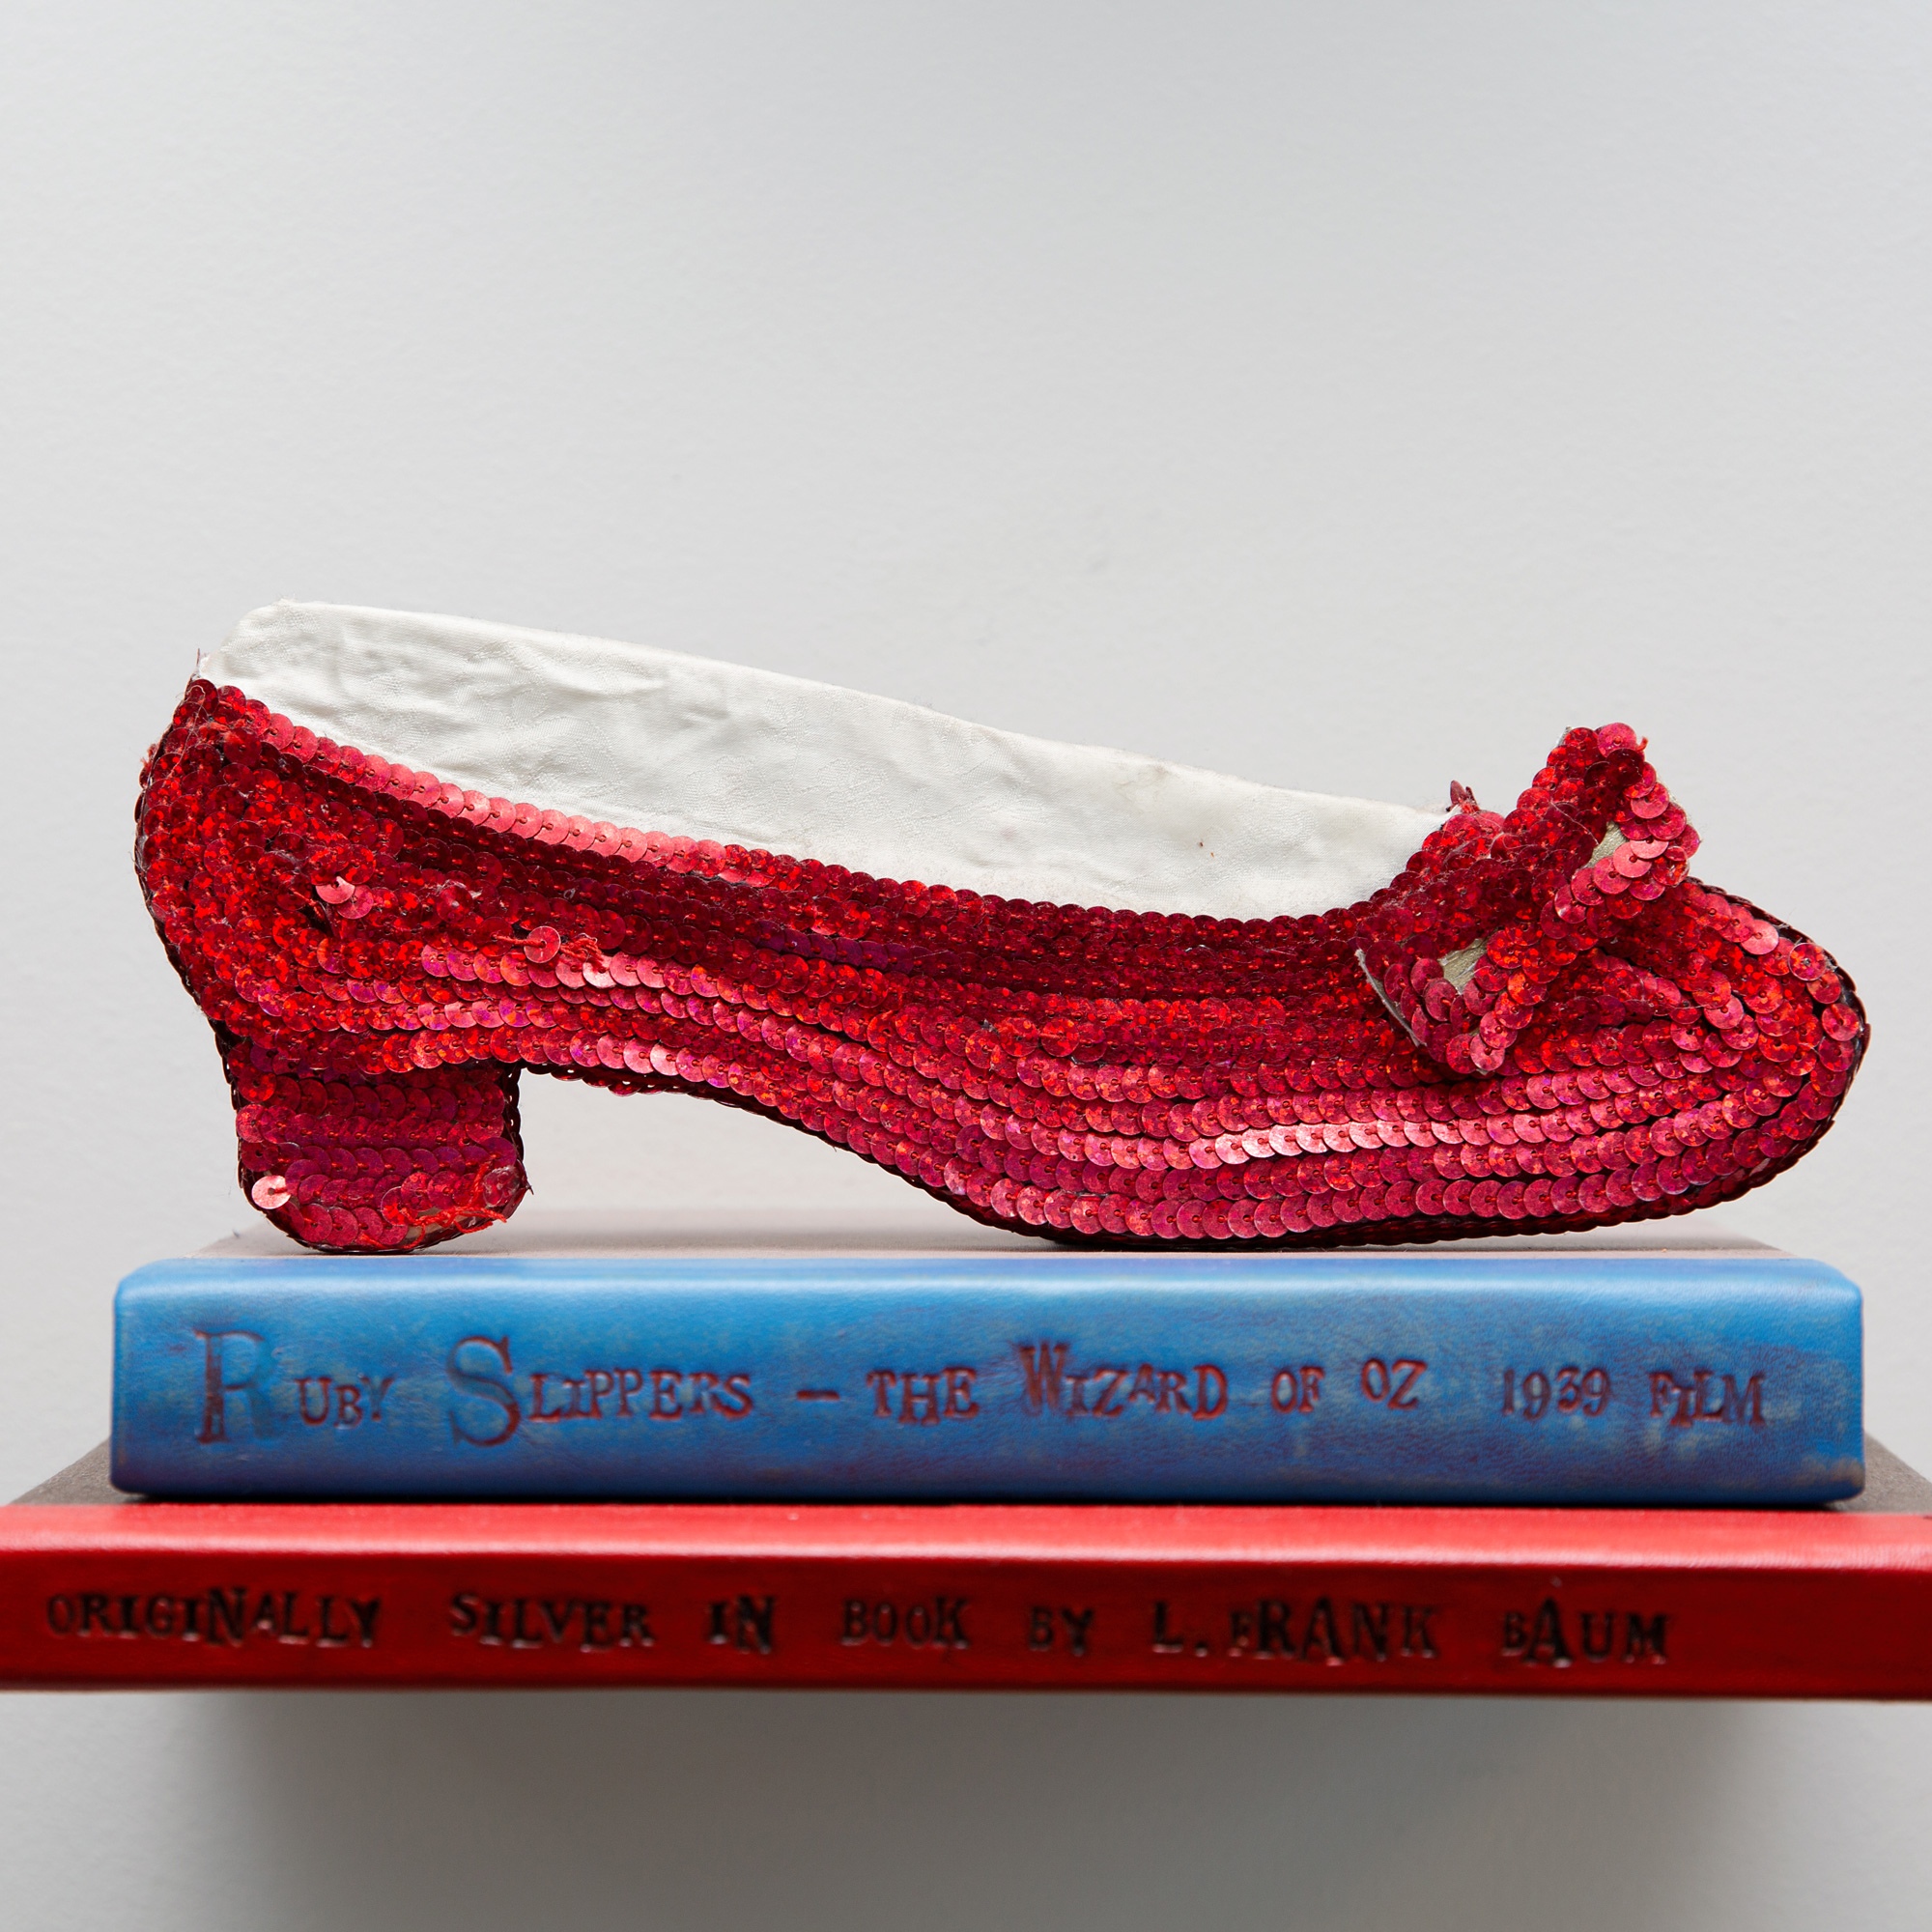 hand made two dimensional red shoe in art display